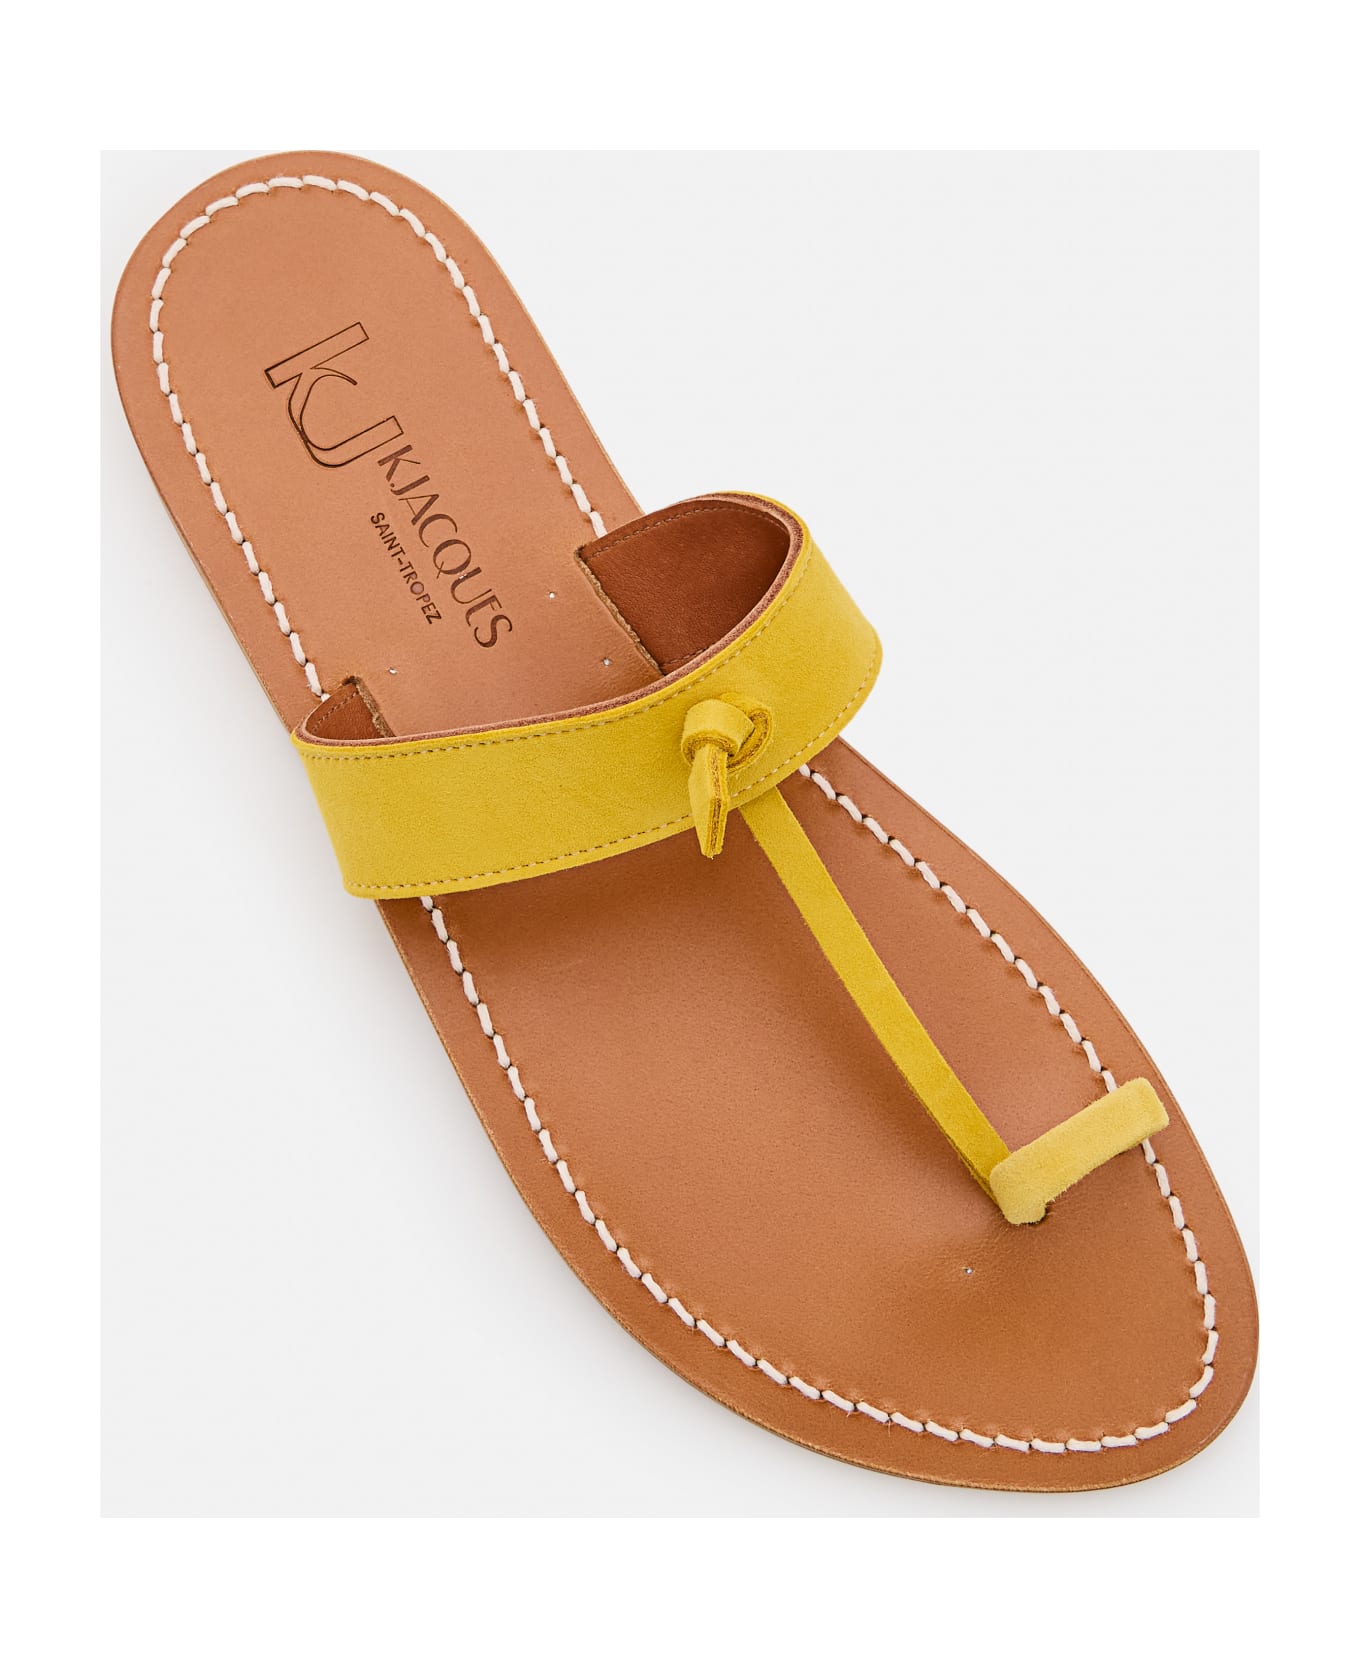 K.Jacques Ganges Leather Sandals - Yellow